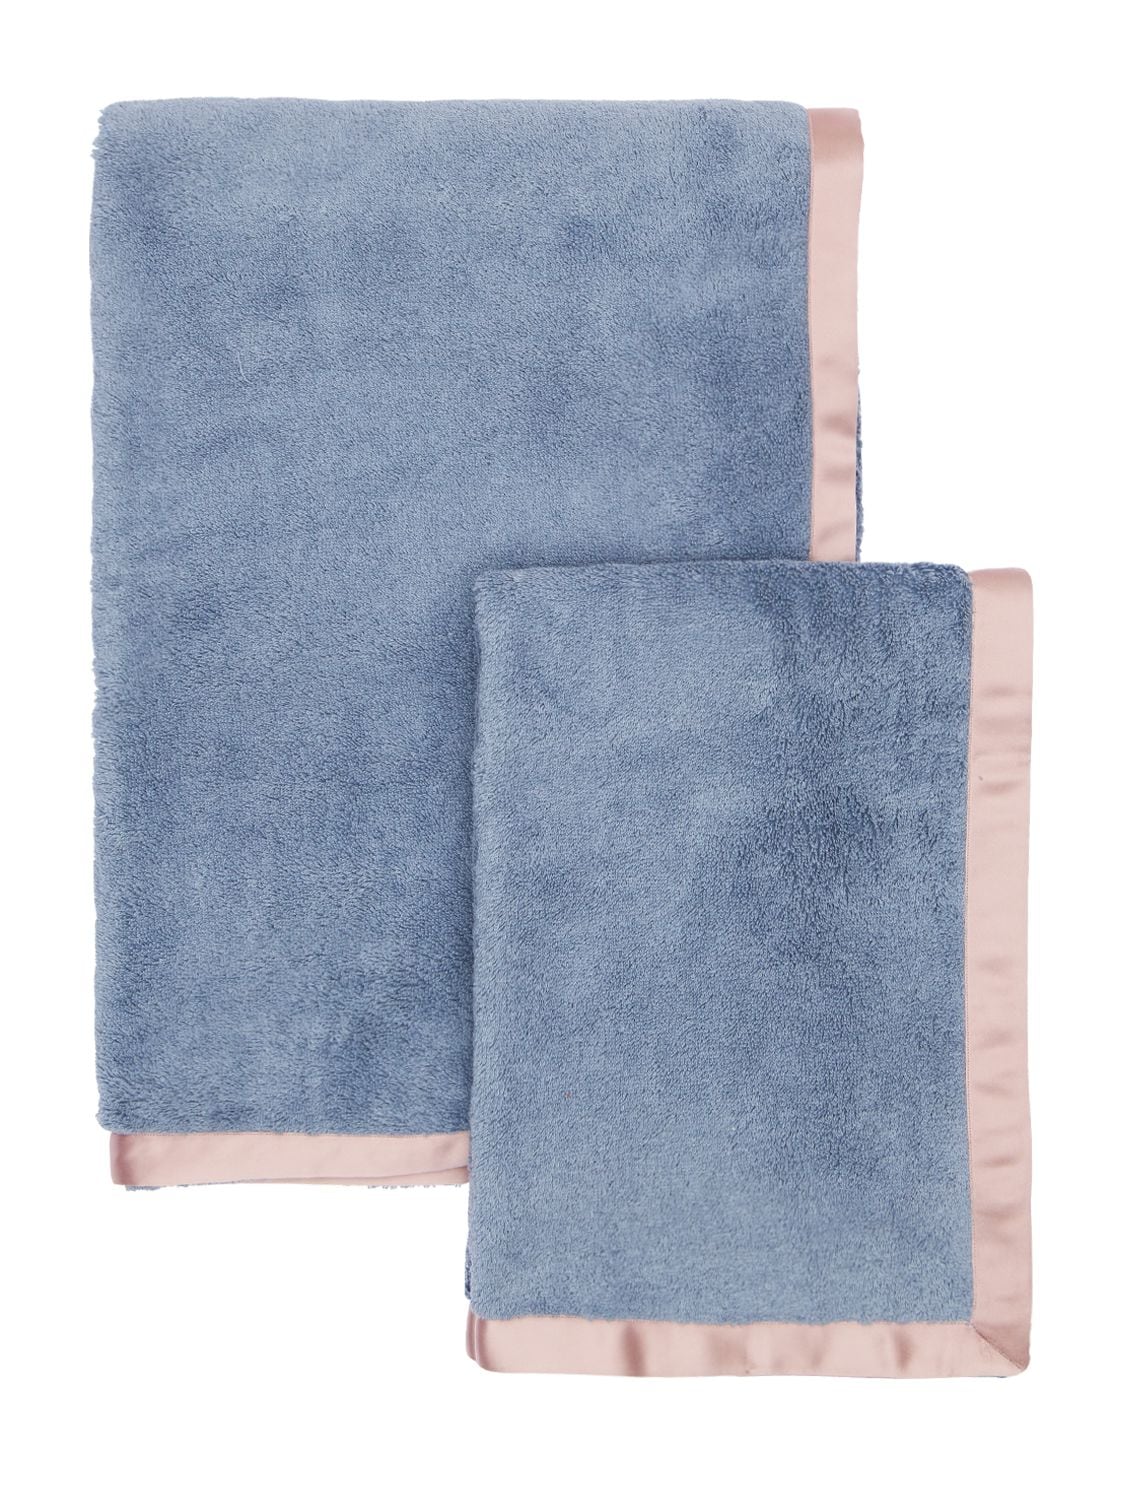 Alessandro Di Marco Set Of 2 Cotton Terrycloth Towels In Grey,pink